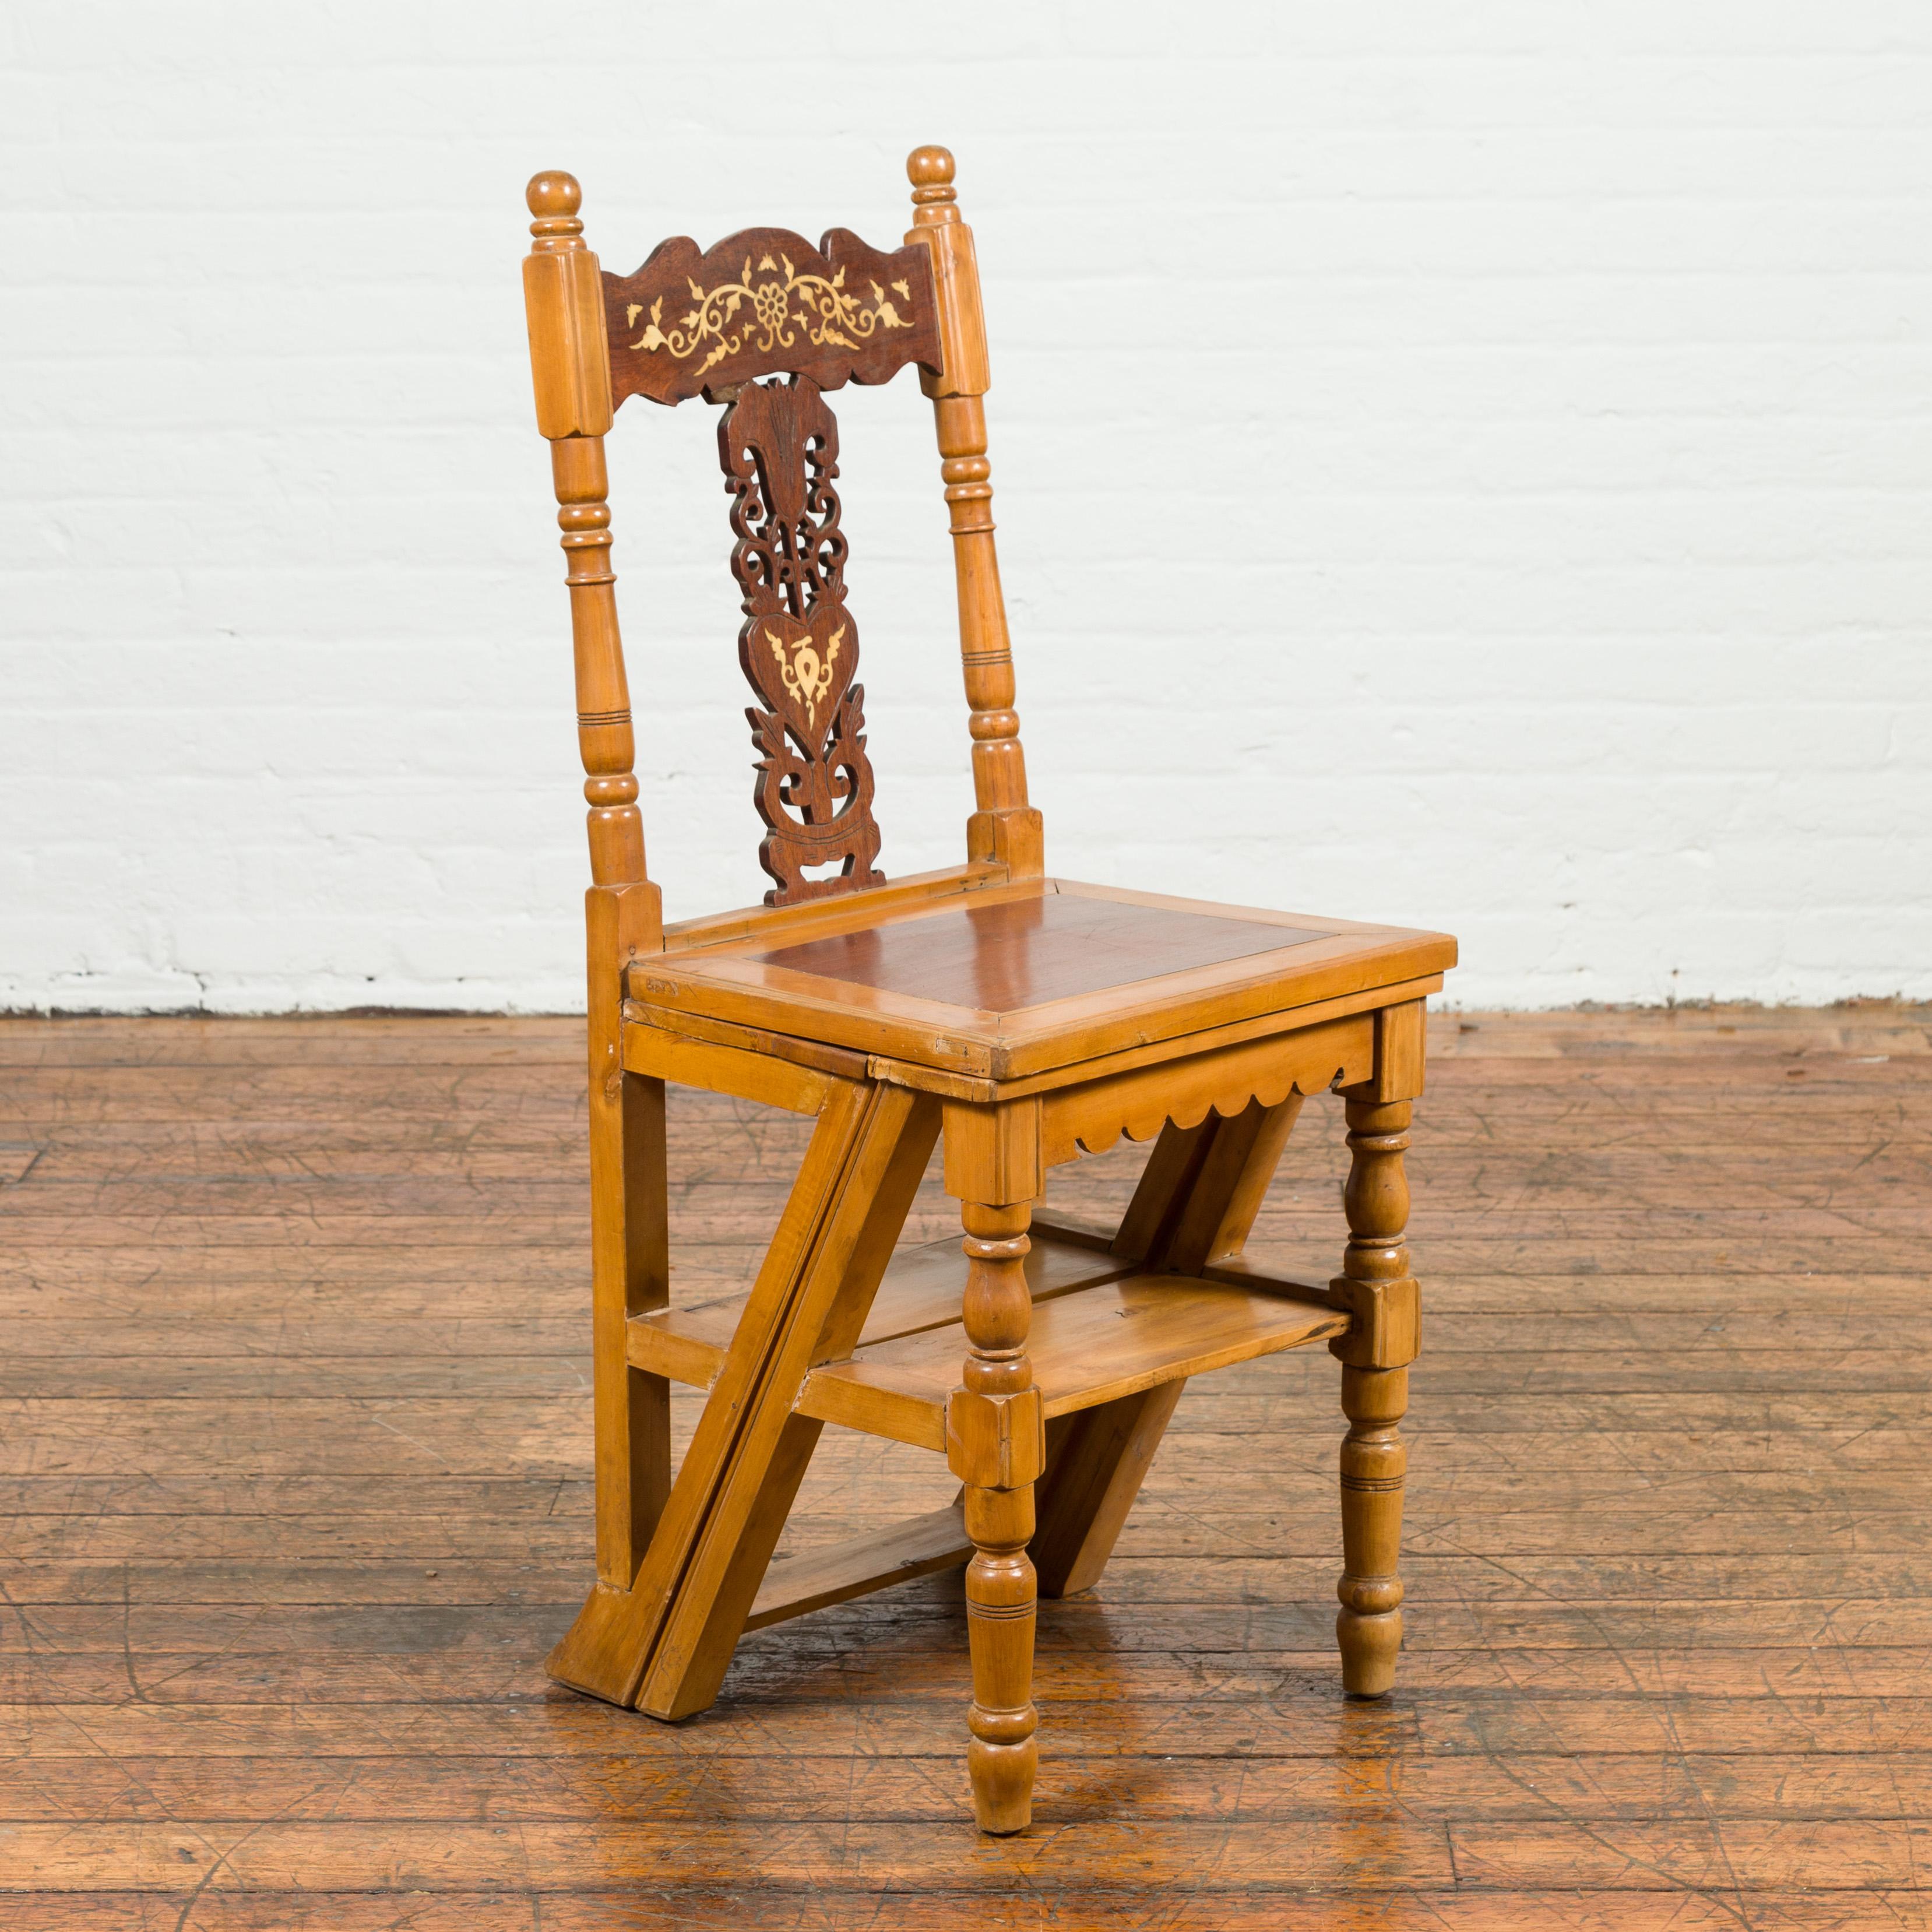 An Indian vintage metamorphic carved side chair from the mid-20th century, with mother of pearl inlay and natural patina. Created in India during the midcentury period, this convenient metamorphic side chair opens up to become a stepladder.